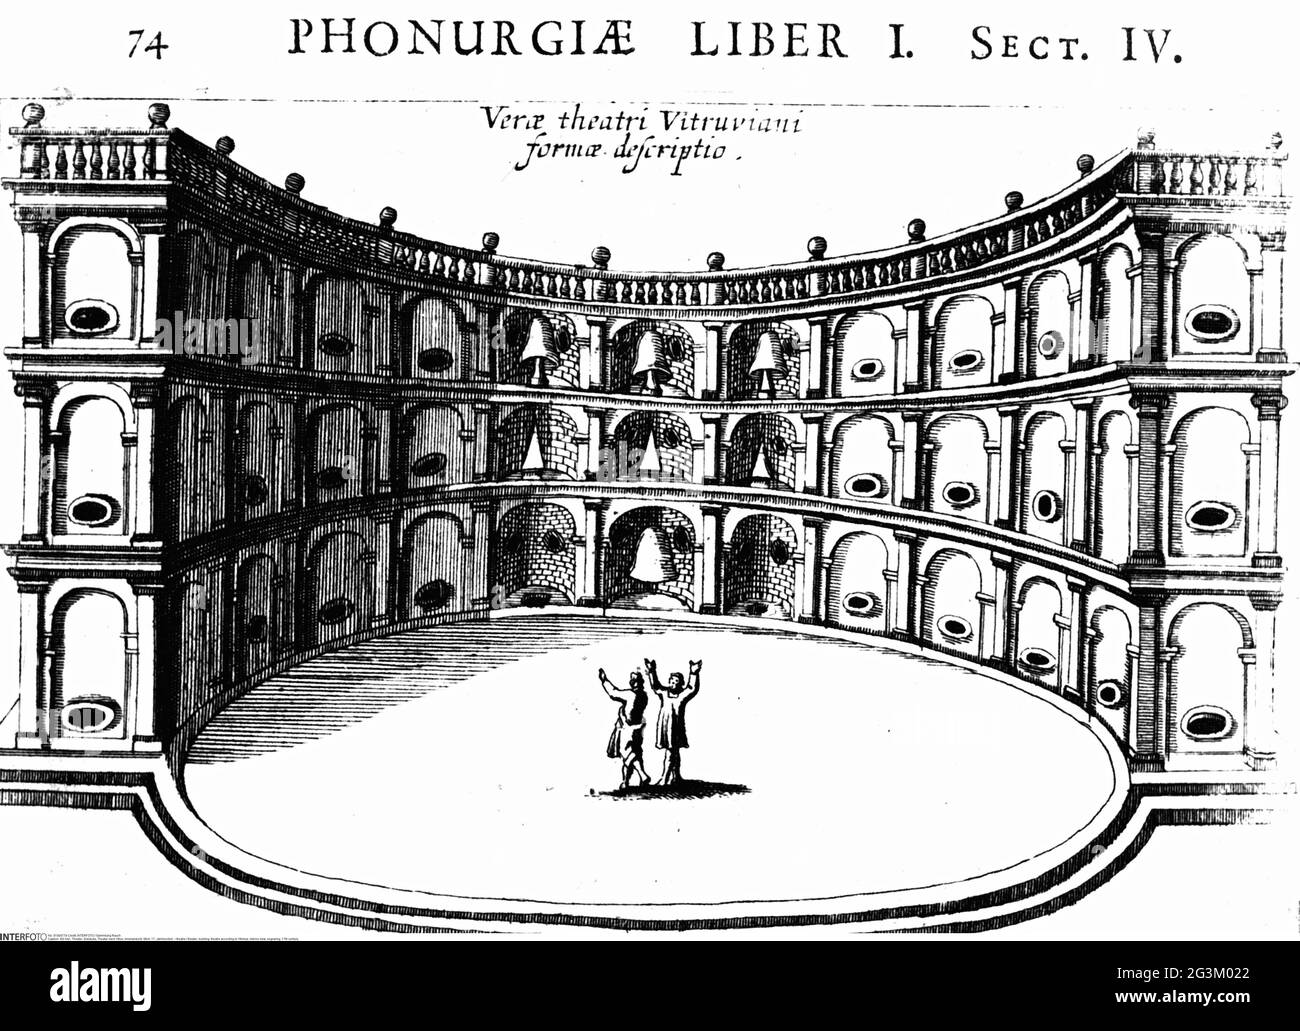 theatre / theater, building, theatre according to Vitrivius, interior view, engraving, 17th century, ARTIST'S COPYRIGHT HAS NOT TO BE CLEARED Stock Photo